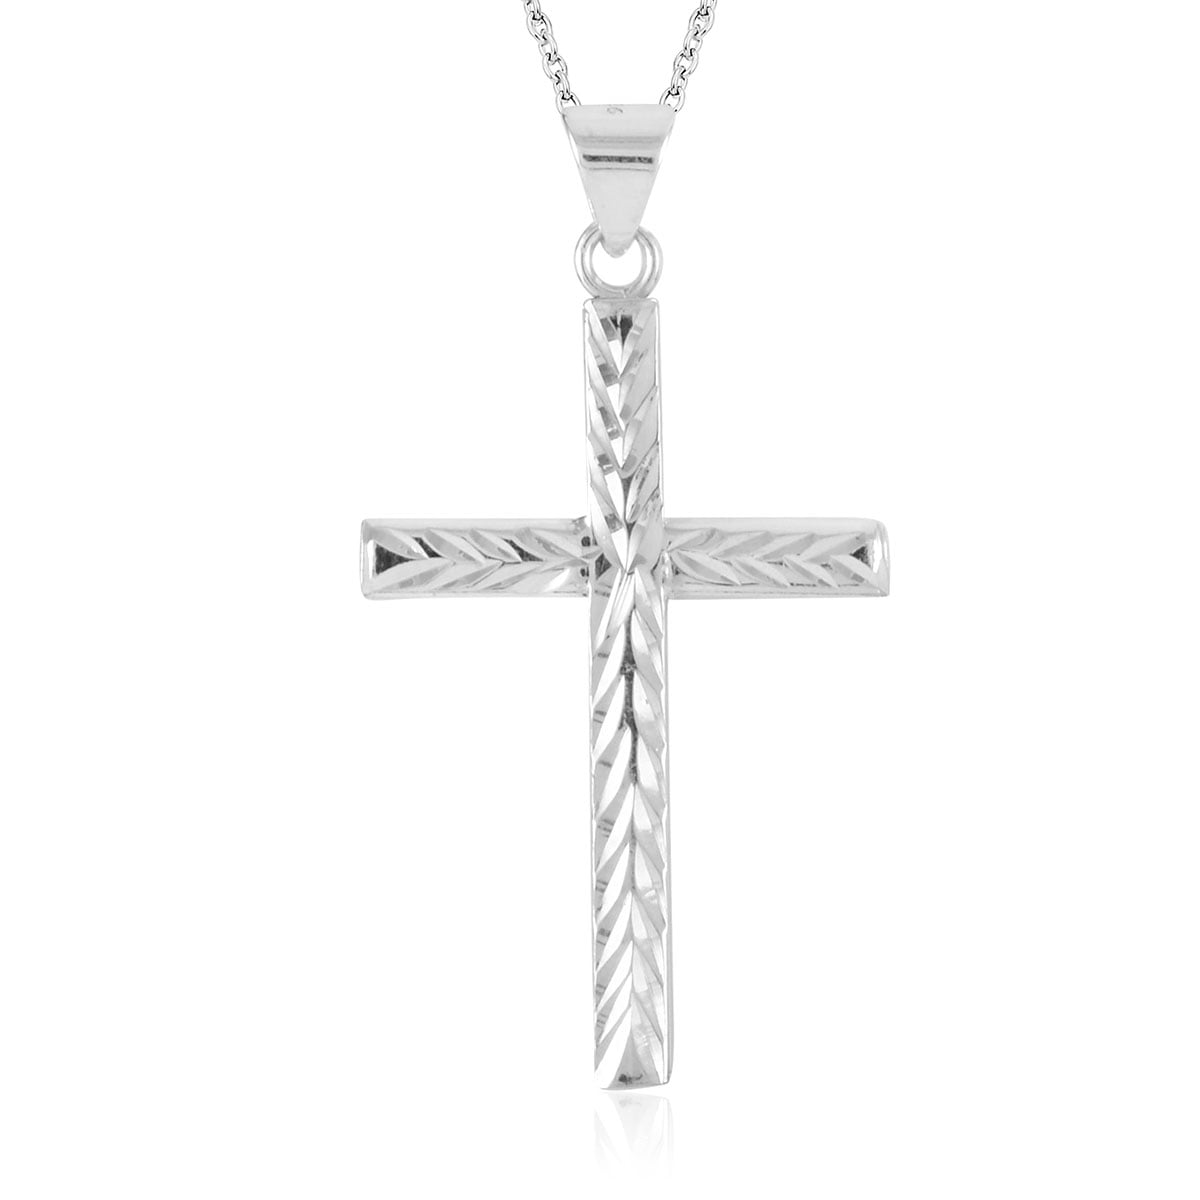 Huge Heavy Sterling Silver Cross with Jesus Pendant Necklace 3.9 Inches 22 Grams